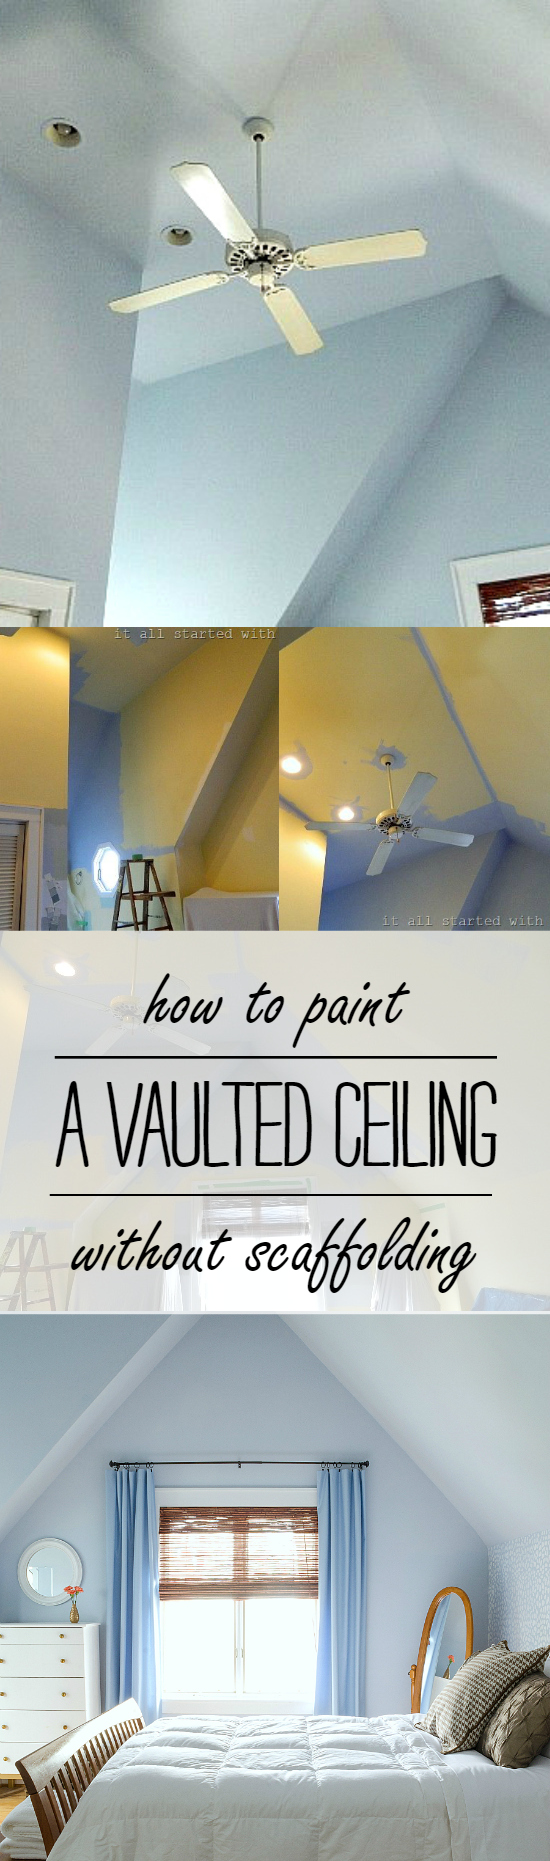 How To Paint A Vaulted Ceiling Without Scaffolding or Platforms